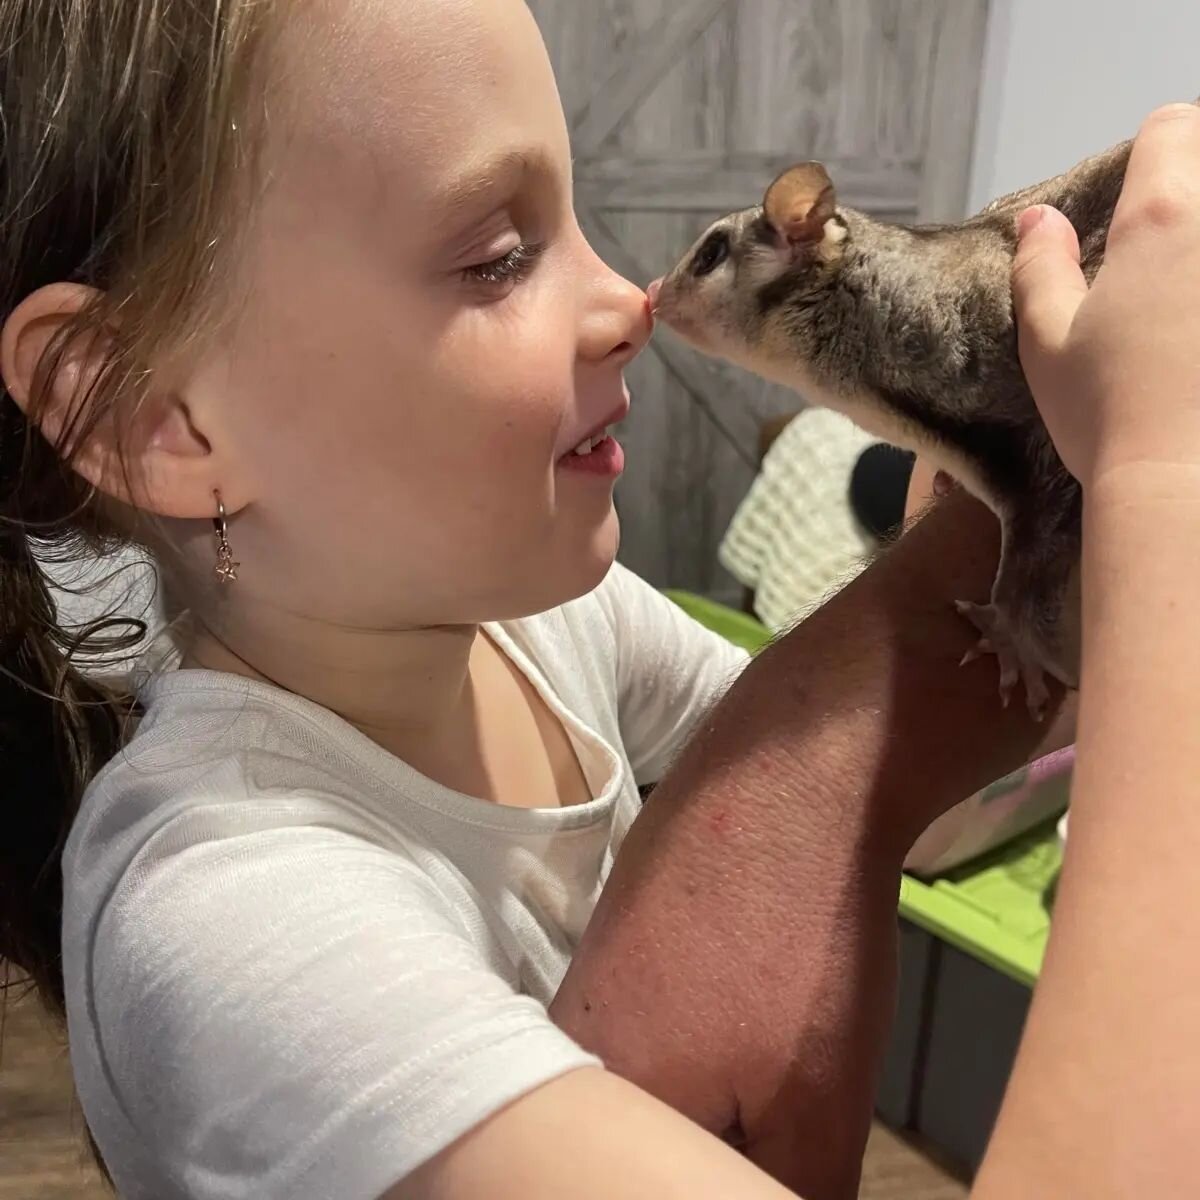 @allforkidsmarket is pleased to announce that @snakesafevictoria are attending the Broadmeadows market on 28th May. they will be bringing a Dingo, Crocodile, Possum and Snake for all the kids that are brave enough to pat and to talk to them about ani